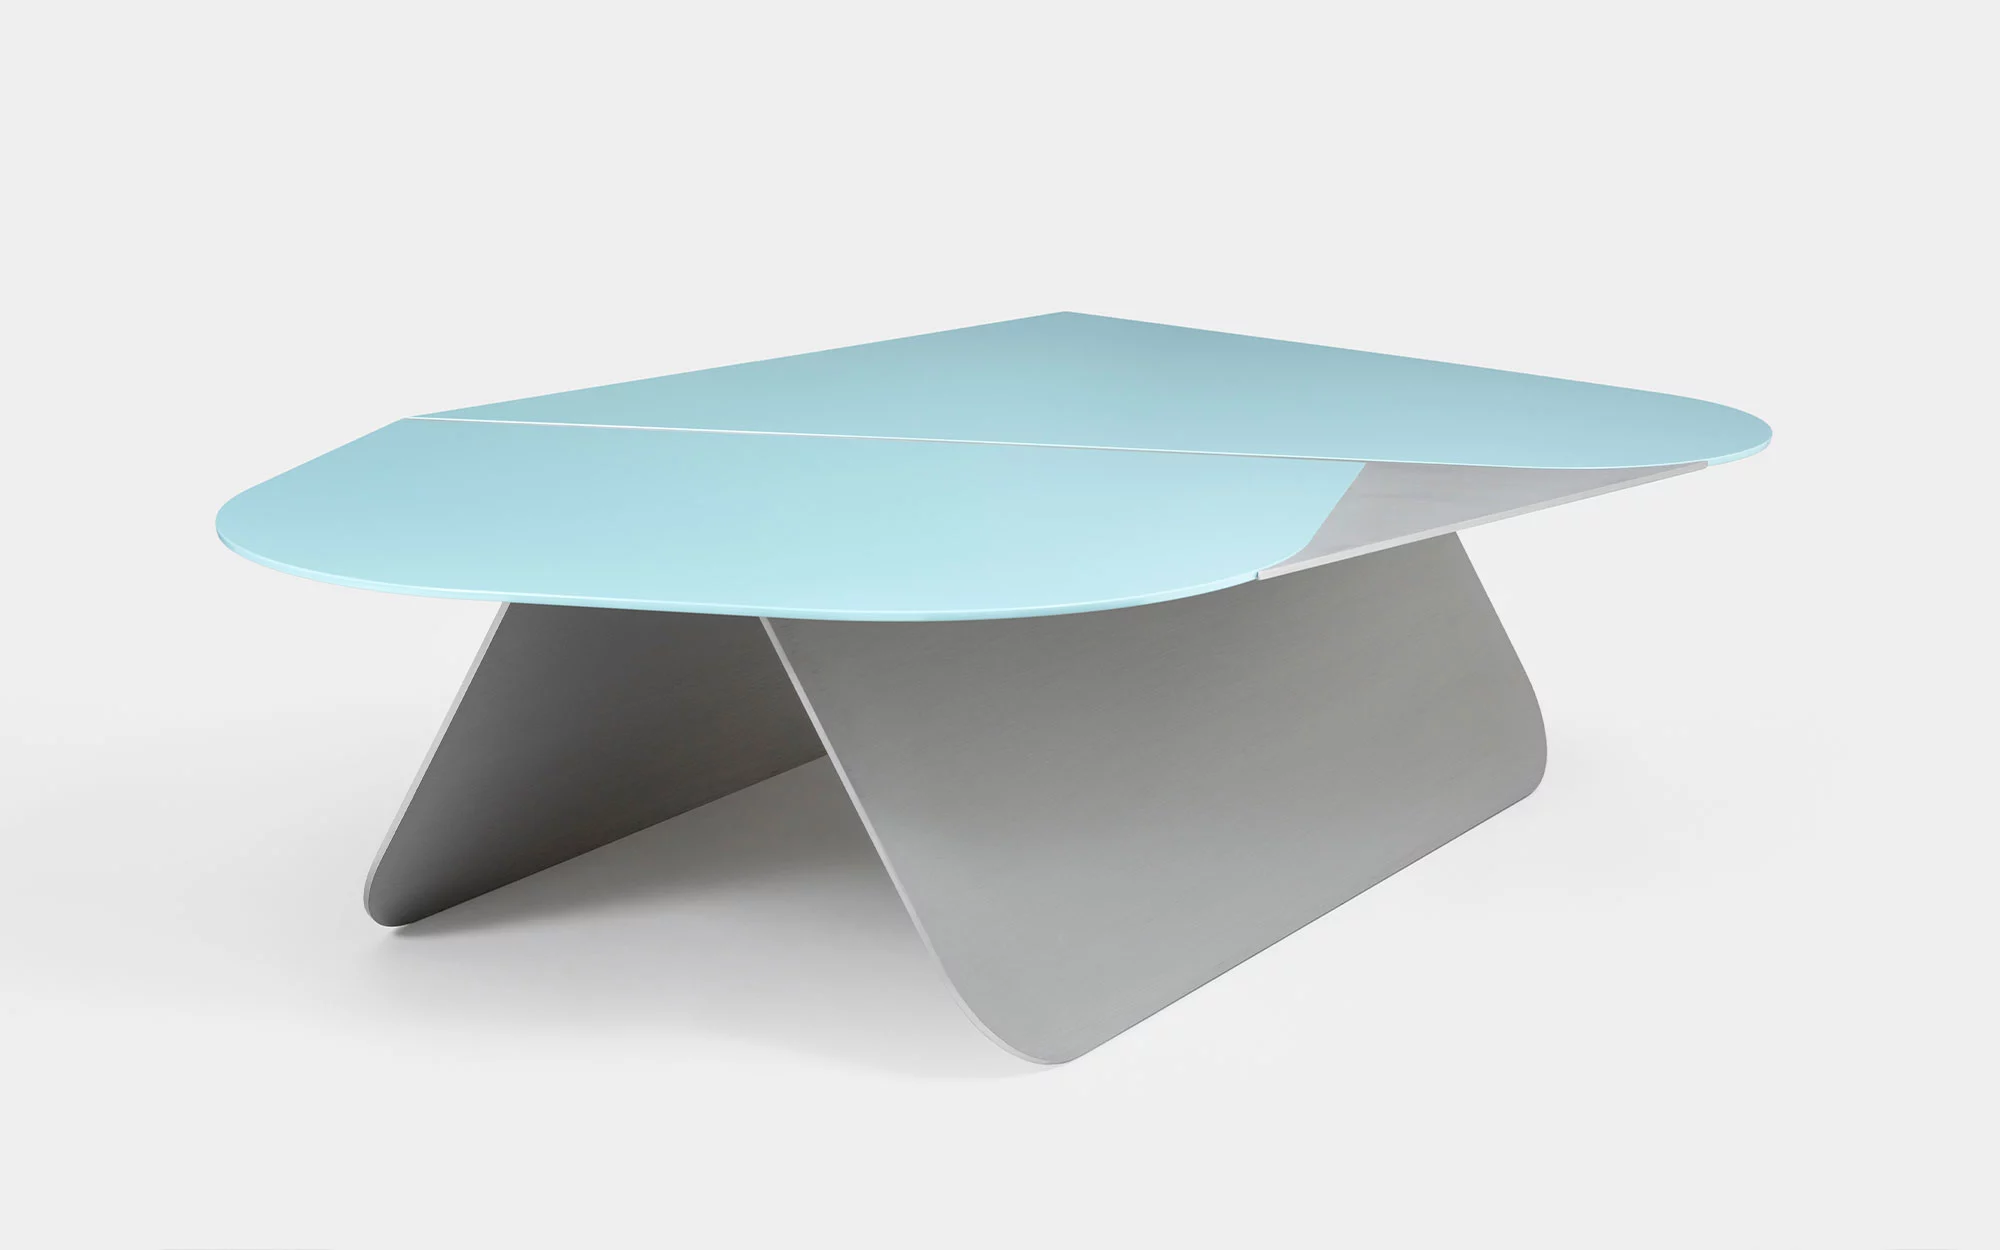 Large DB Coffee Table - Pierre Charpin - Bench - Galerie kreo